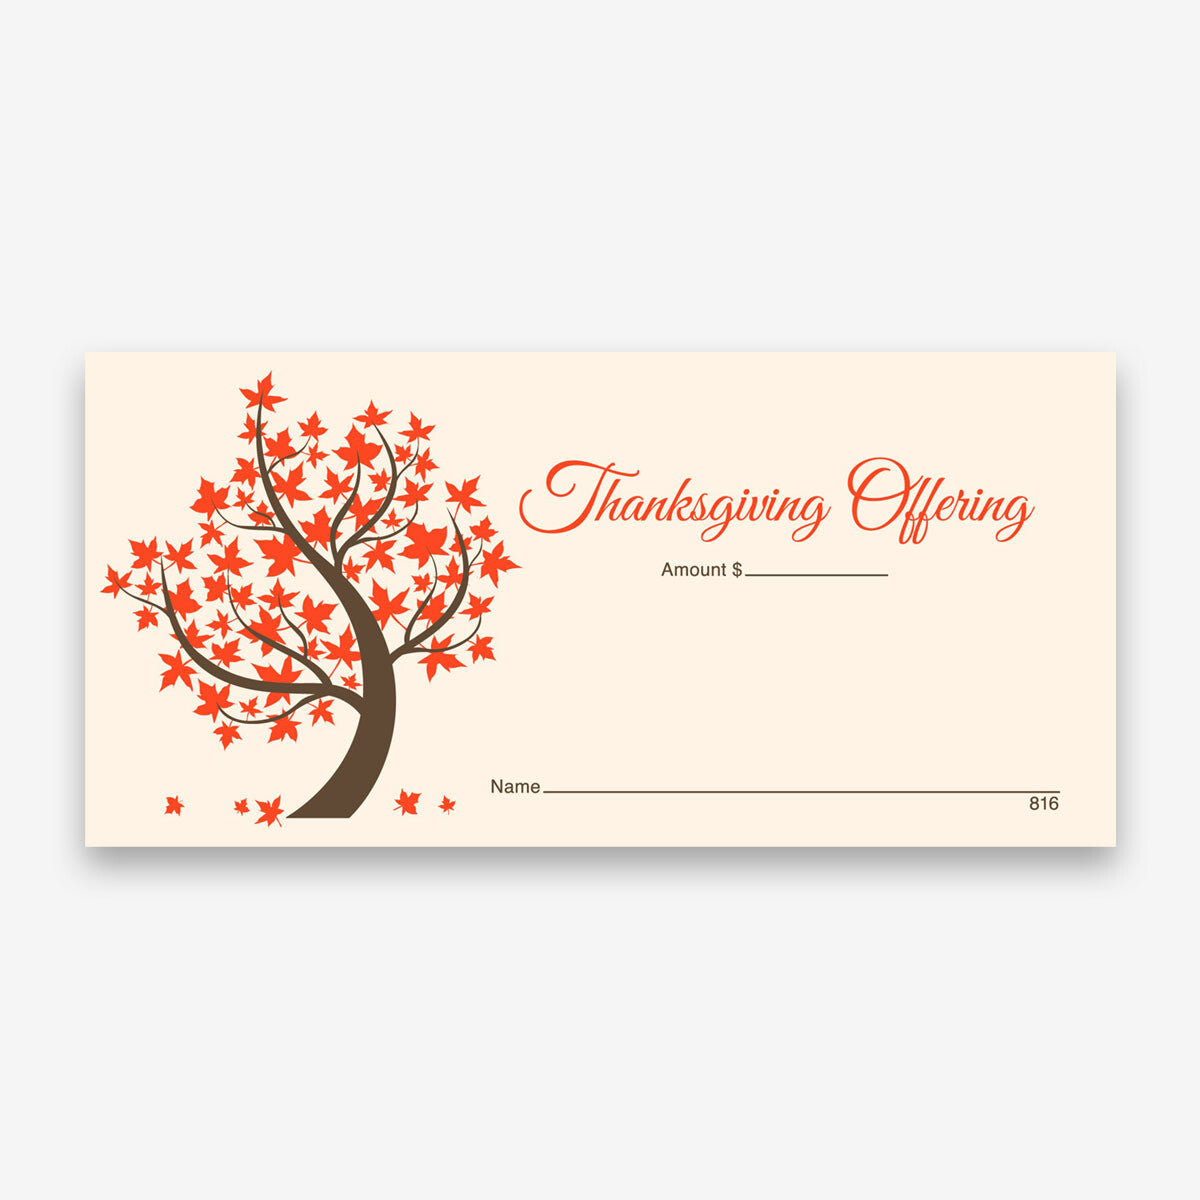 NCS National Church Solutions Thanksgiving Offering Envelope